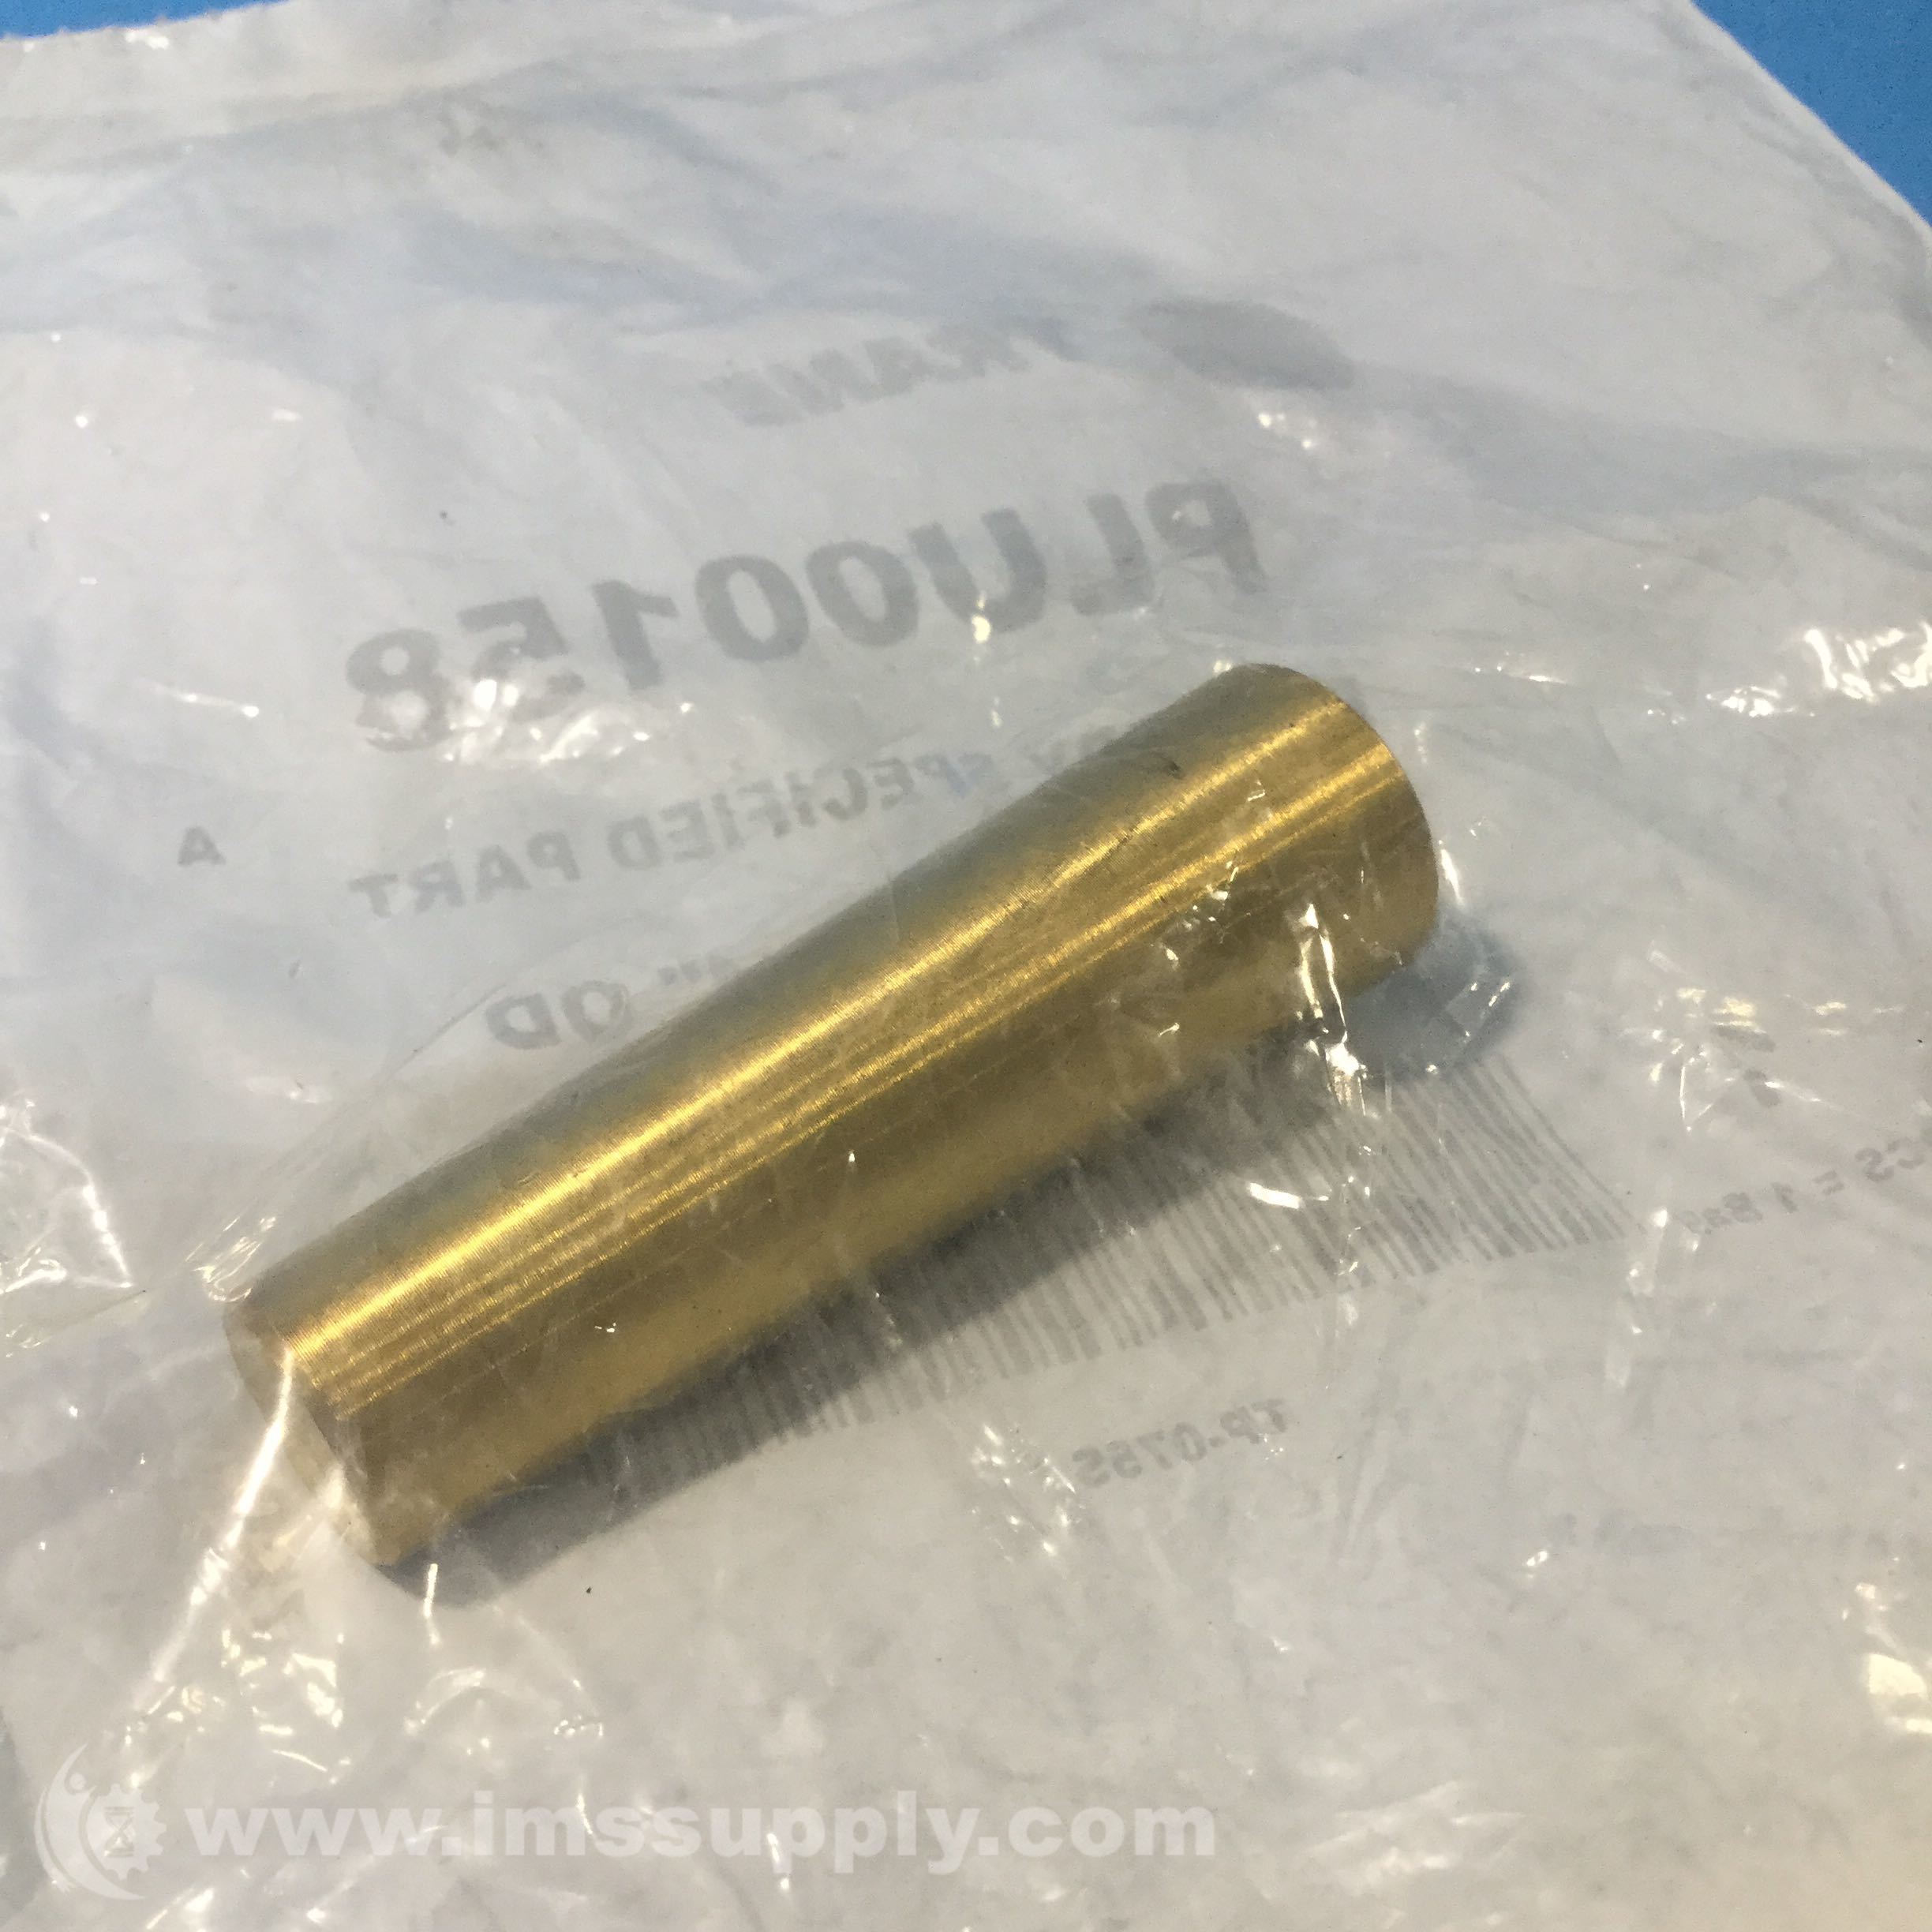 Details about   Trane HVAC PLU00358 1" Inch OD Tube Brass Plug NEW IN PACKAGE 